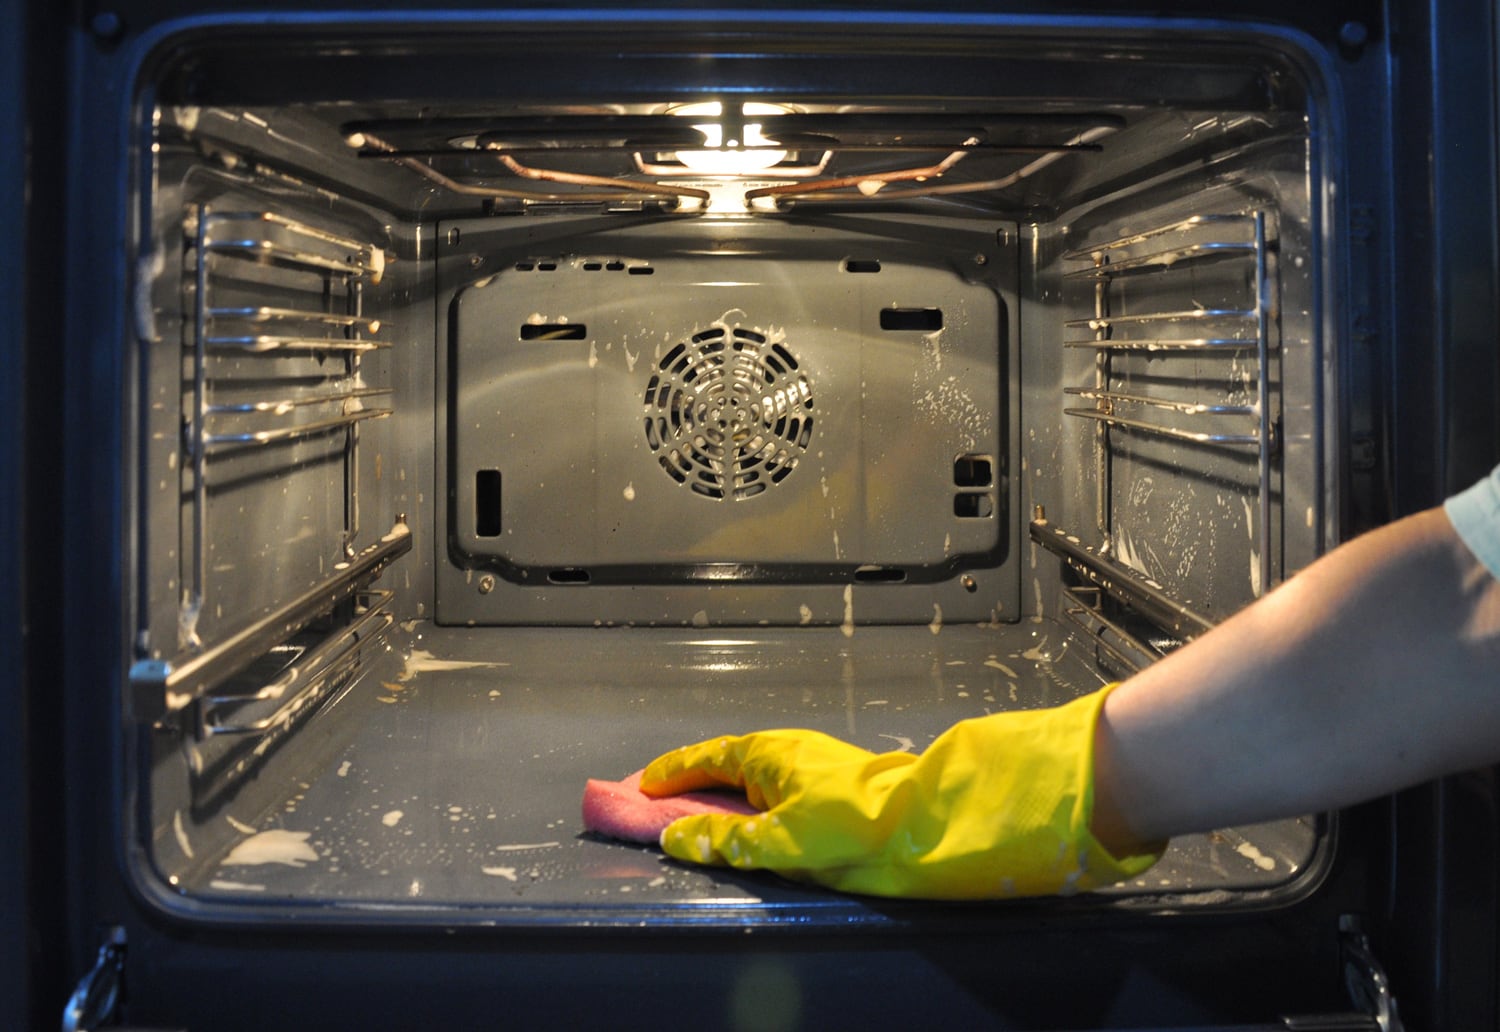 Cleaning the oven in the kitchen. hand in a yellow household glove out of focus on the background of the oven.